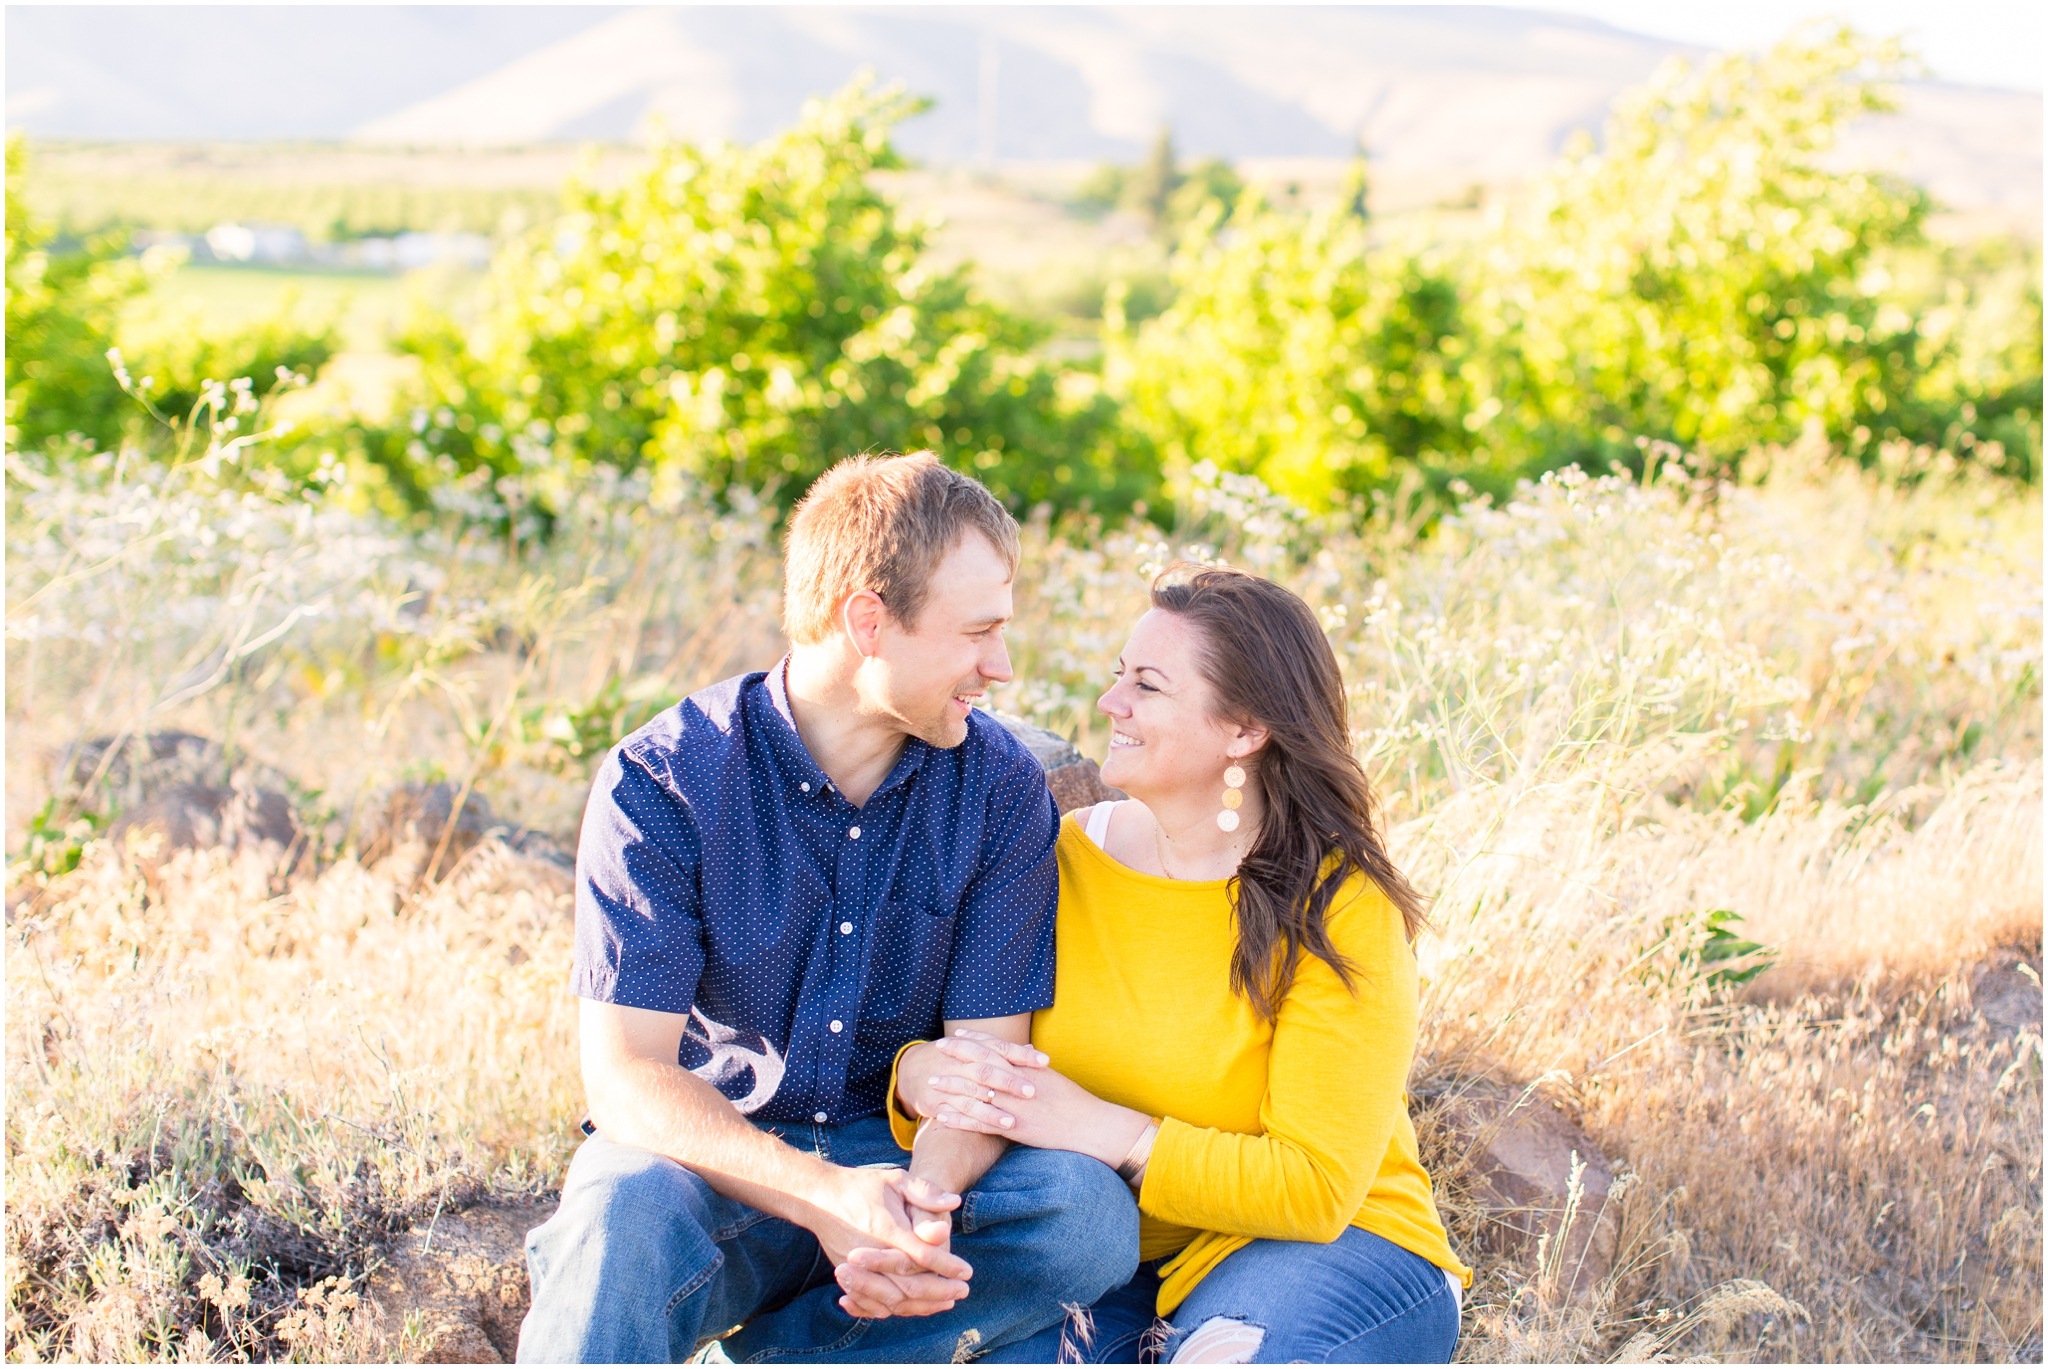 This Yakima engagement session was captured by Spokane wedding photographer in town for a Fontaine Estates Winery wedding. Liz and Kevin will be having a fall American Homestead wedding captured by Yakima wedding photographer Taylor Rose Photography.